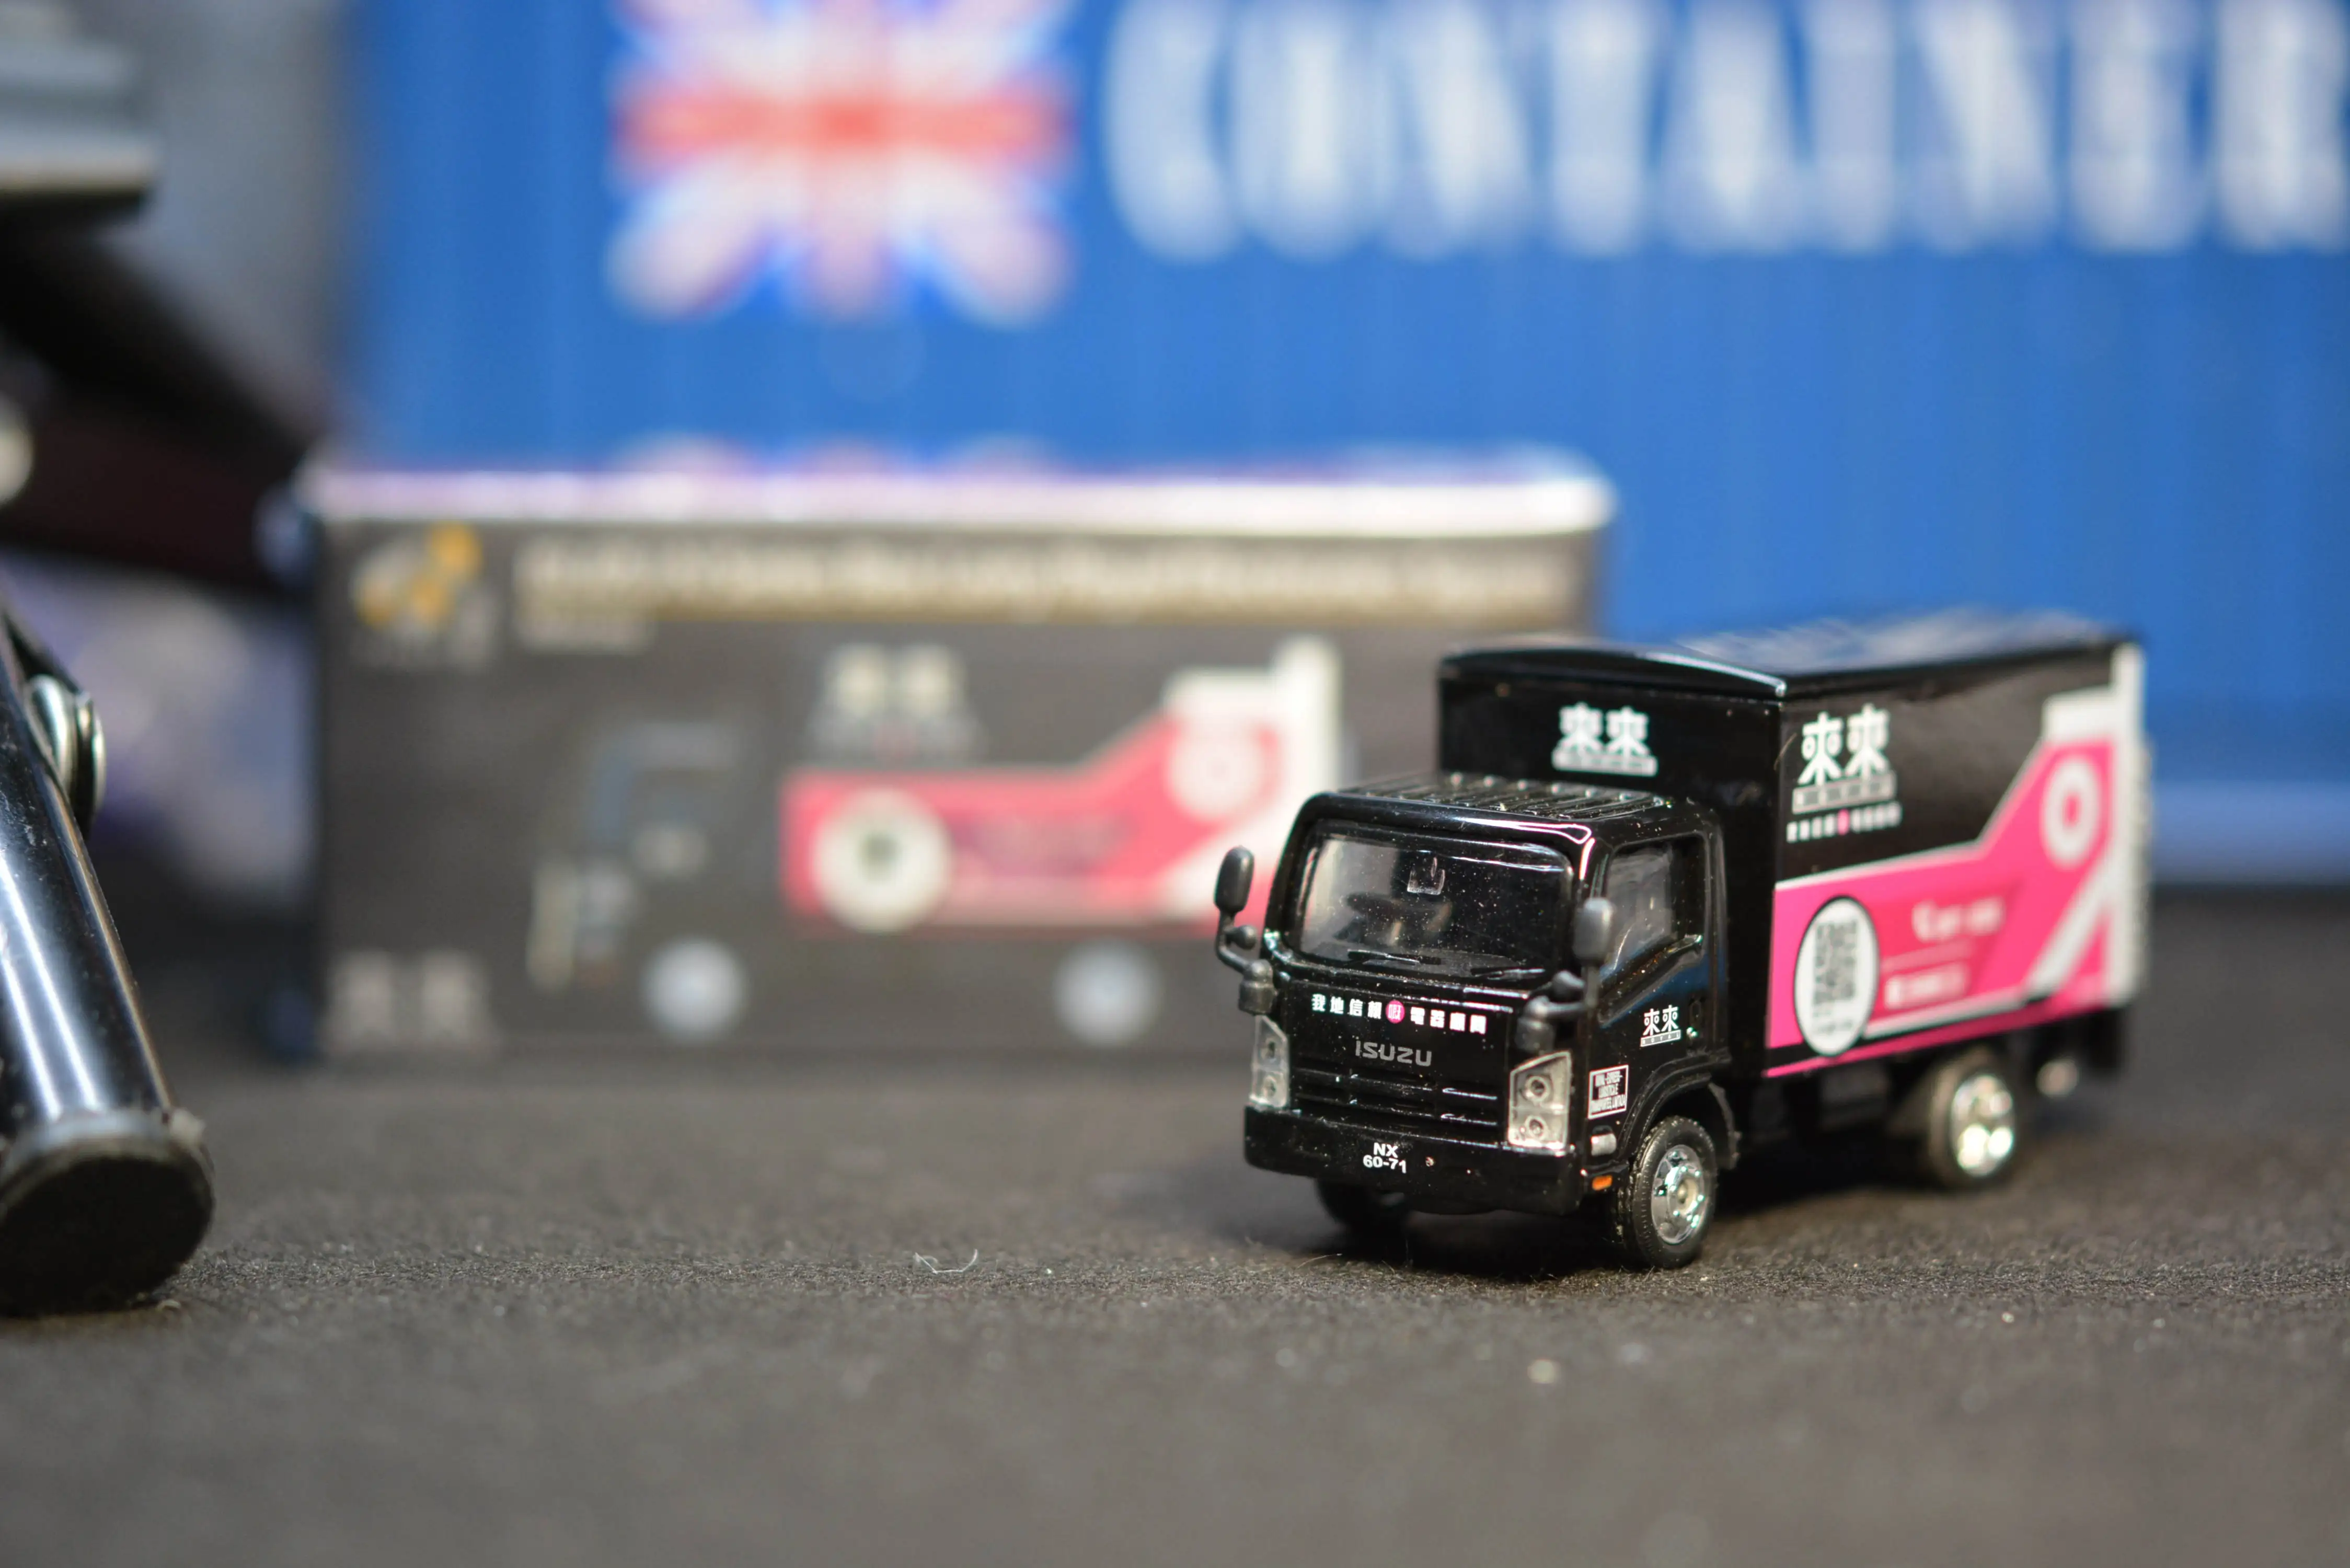 

Tiny 1/76 Isuzu N Series Box Lorry Royal Electronics Square ATC64459 Die Cast Model Car Collection Limited